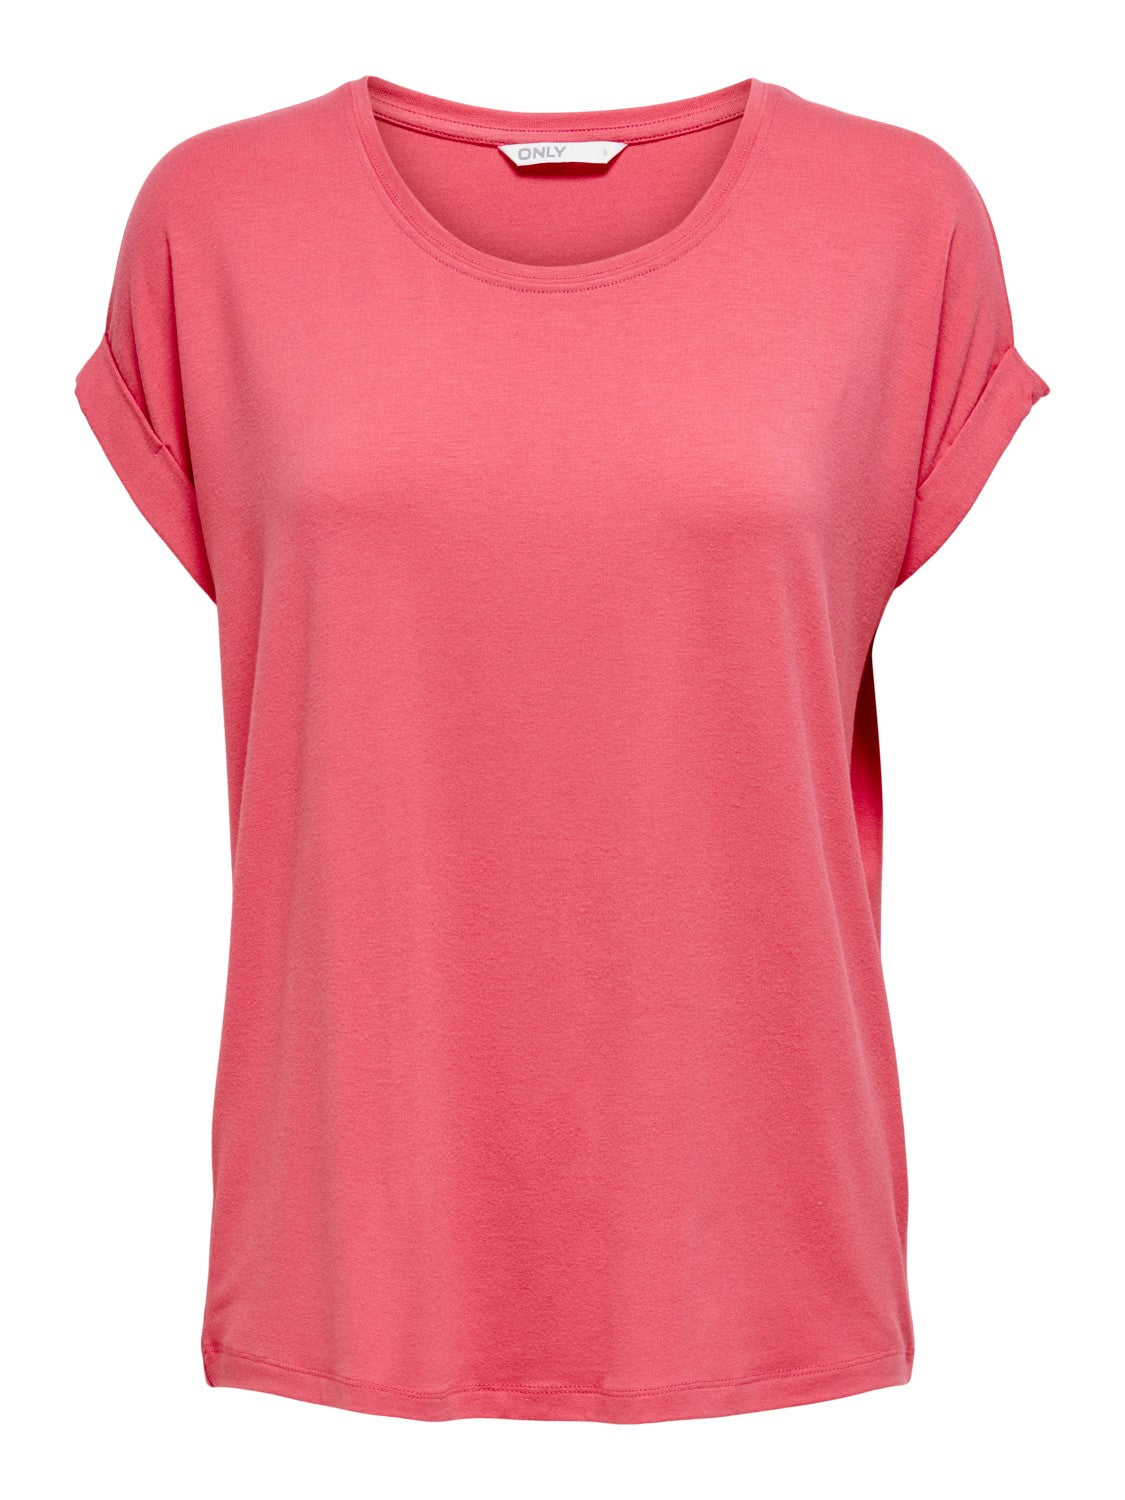 ONLY women's coral T-shirt